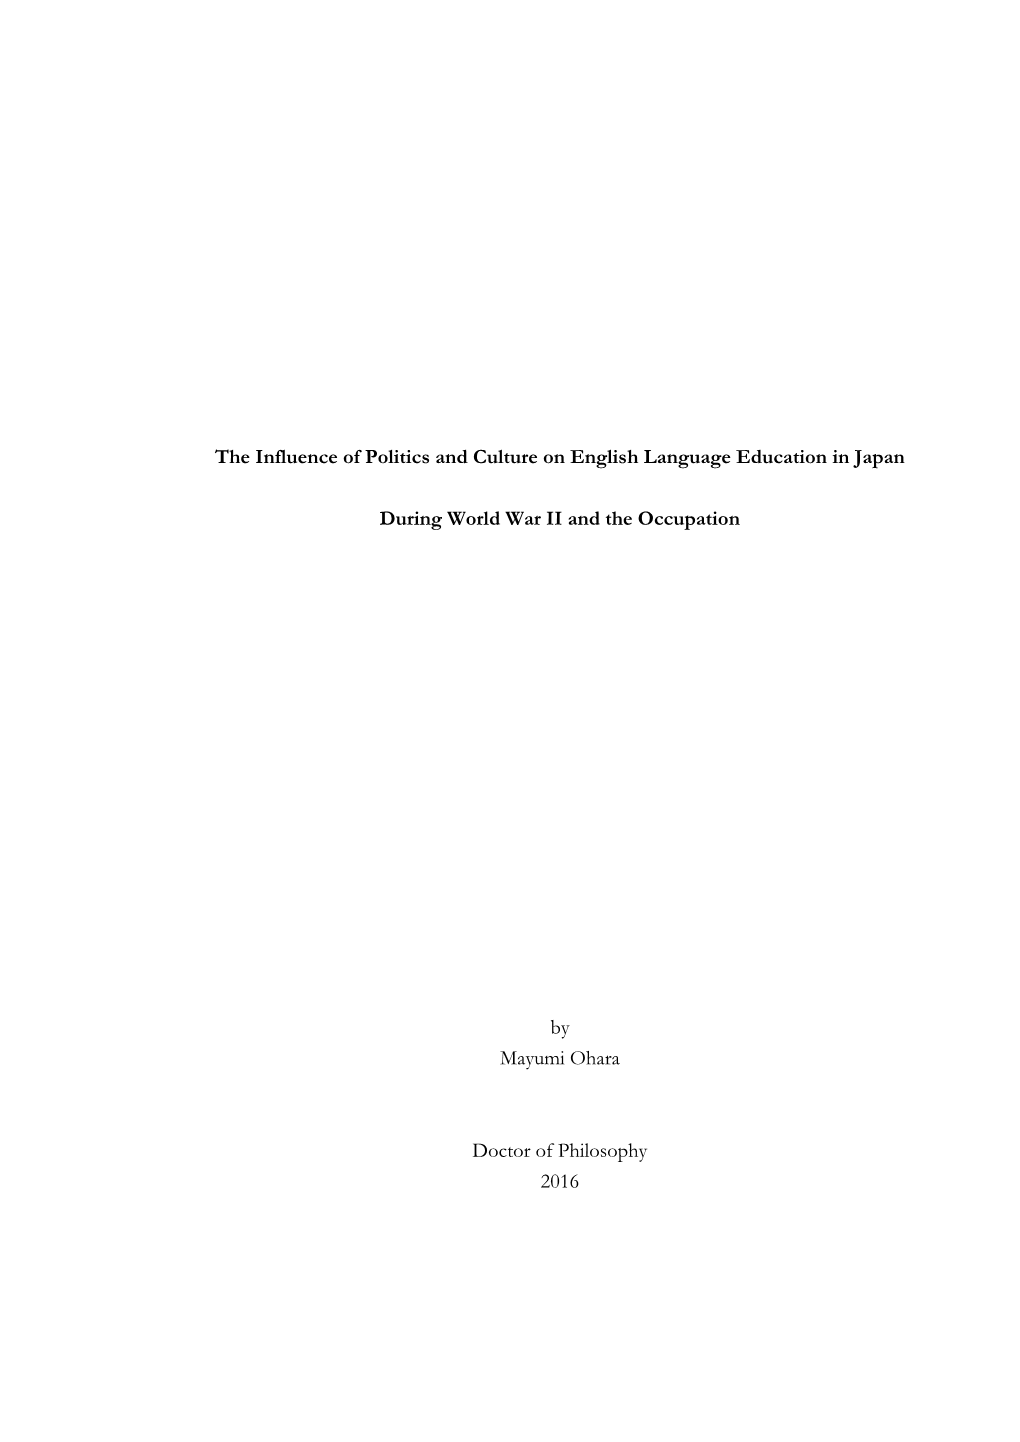 The Influence of Politics and Culture on English Language Education in Japan During World War II and the Occupation